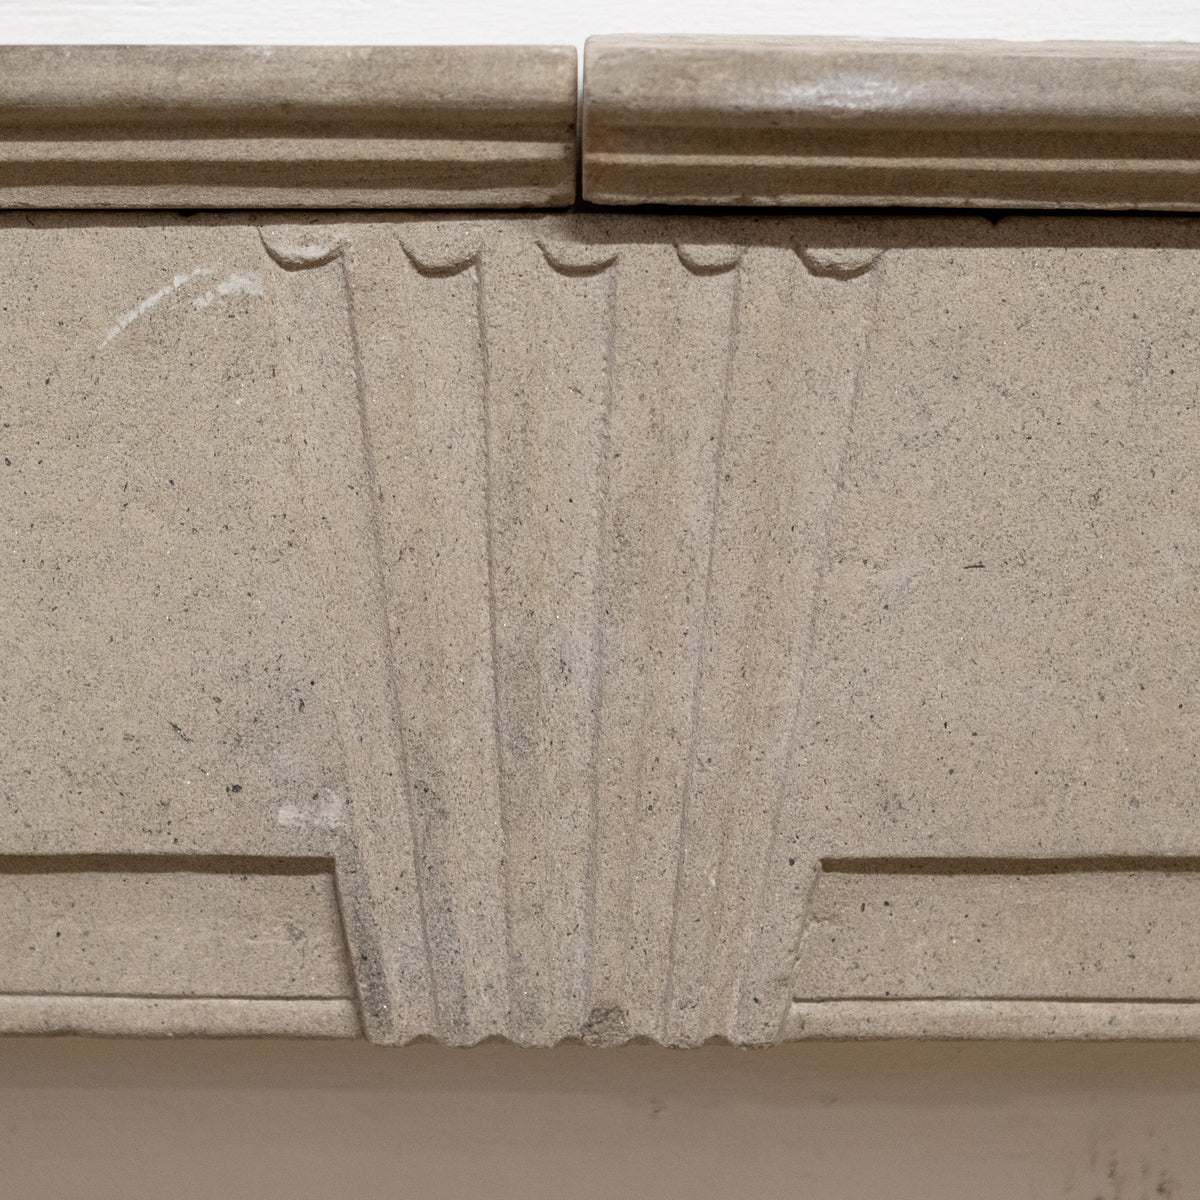 Rare Antique Queen Anne Stone Fireplace Surround | The Architectural Forum